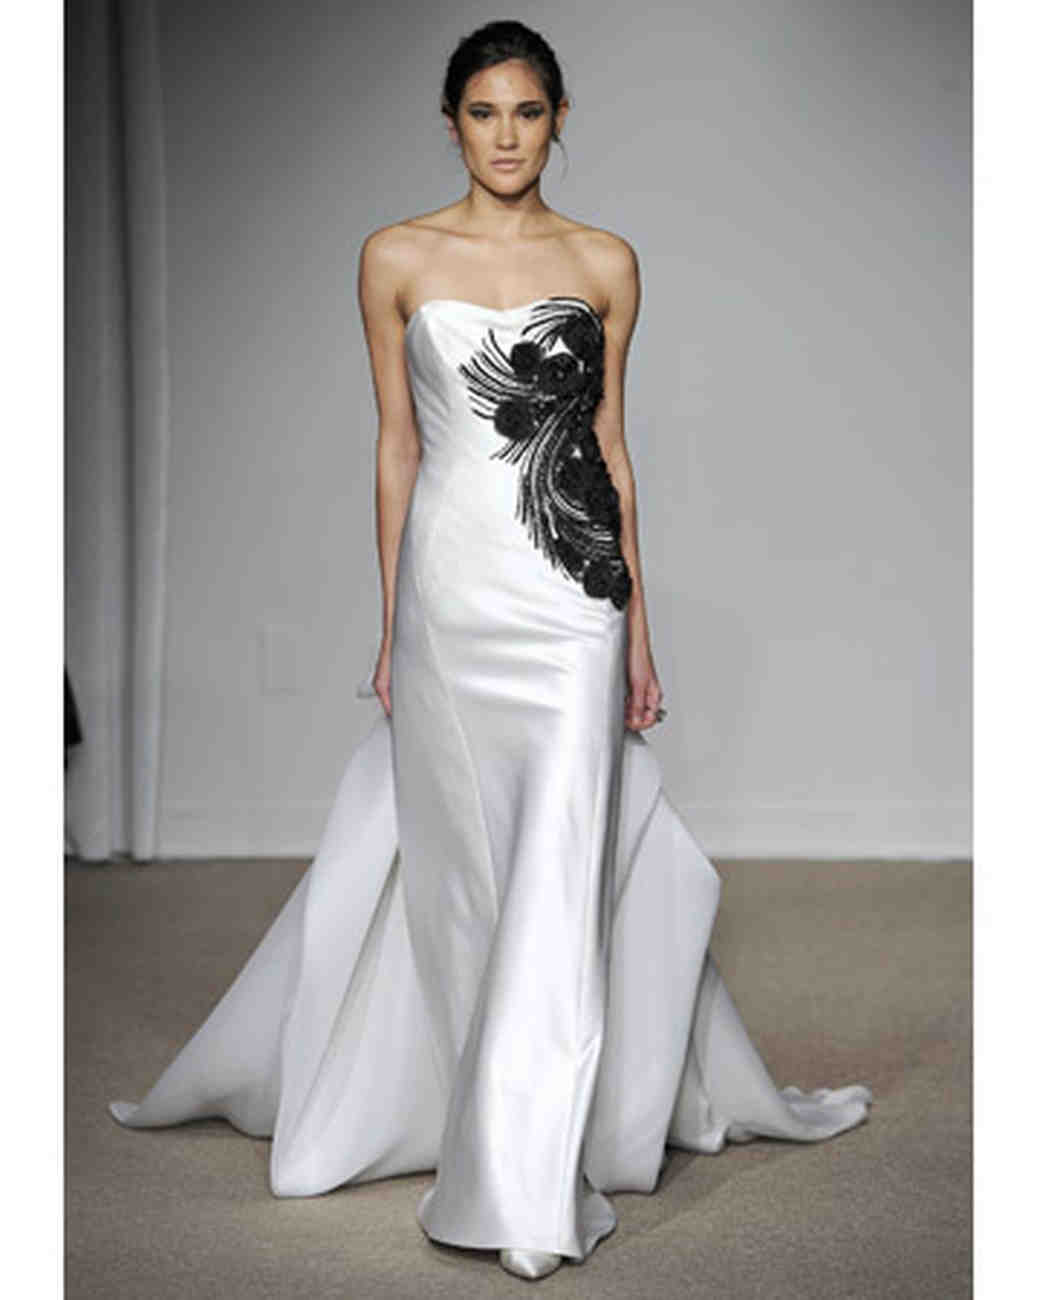 Wedding Dresses with Black Accents from Spring 2012 Bridal